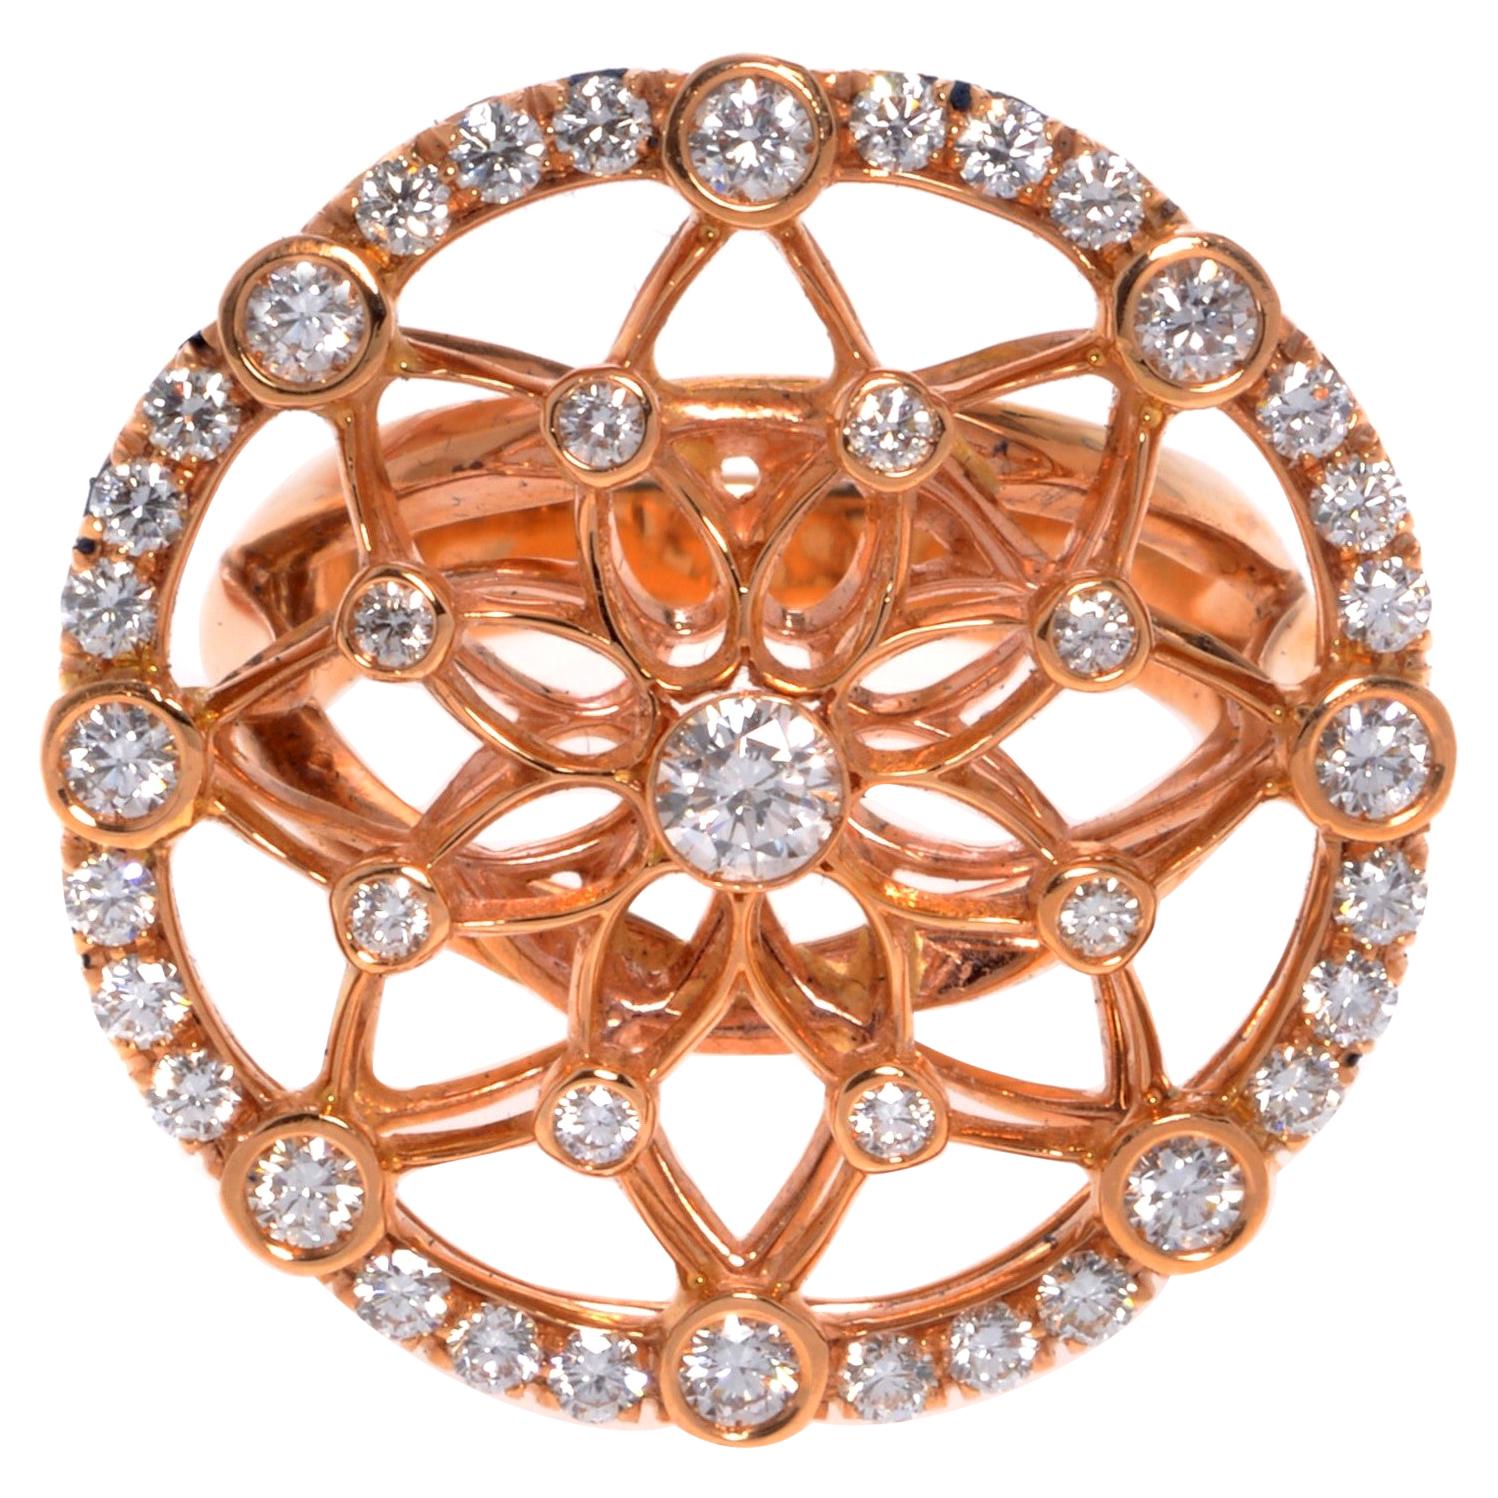 Luca Carati Diamond Large Cocktail Ring 18K Rose Gold 1.21Cttw Size 6.75 For Sale